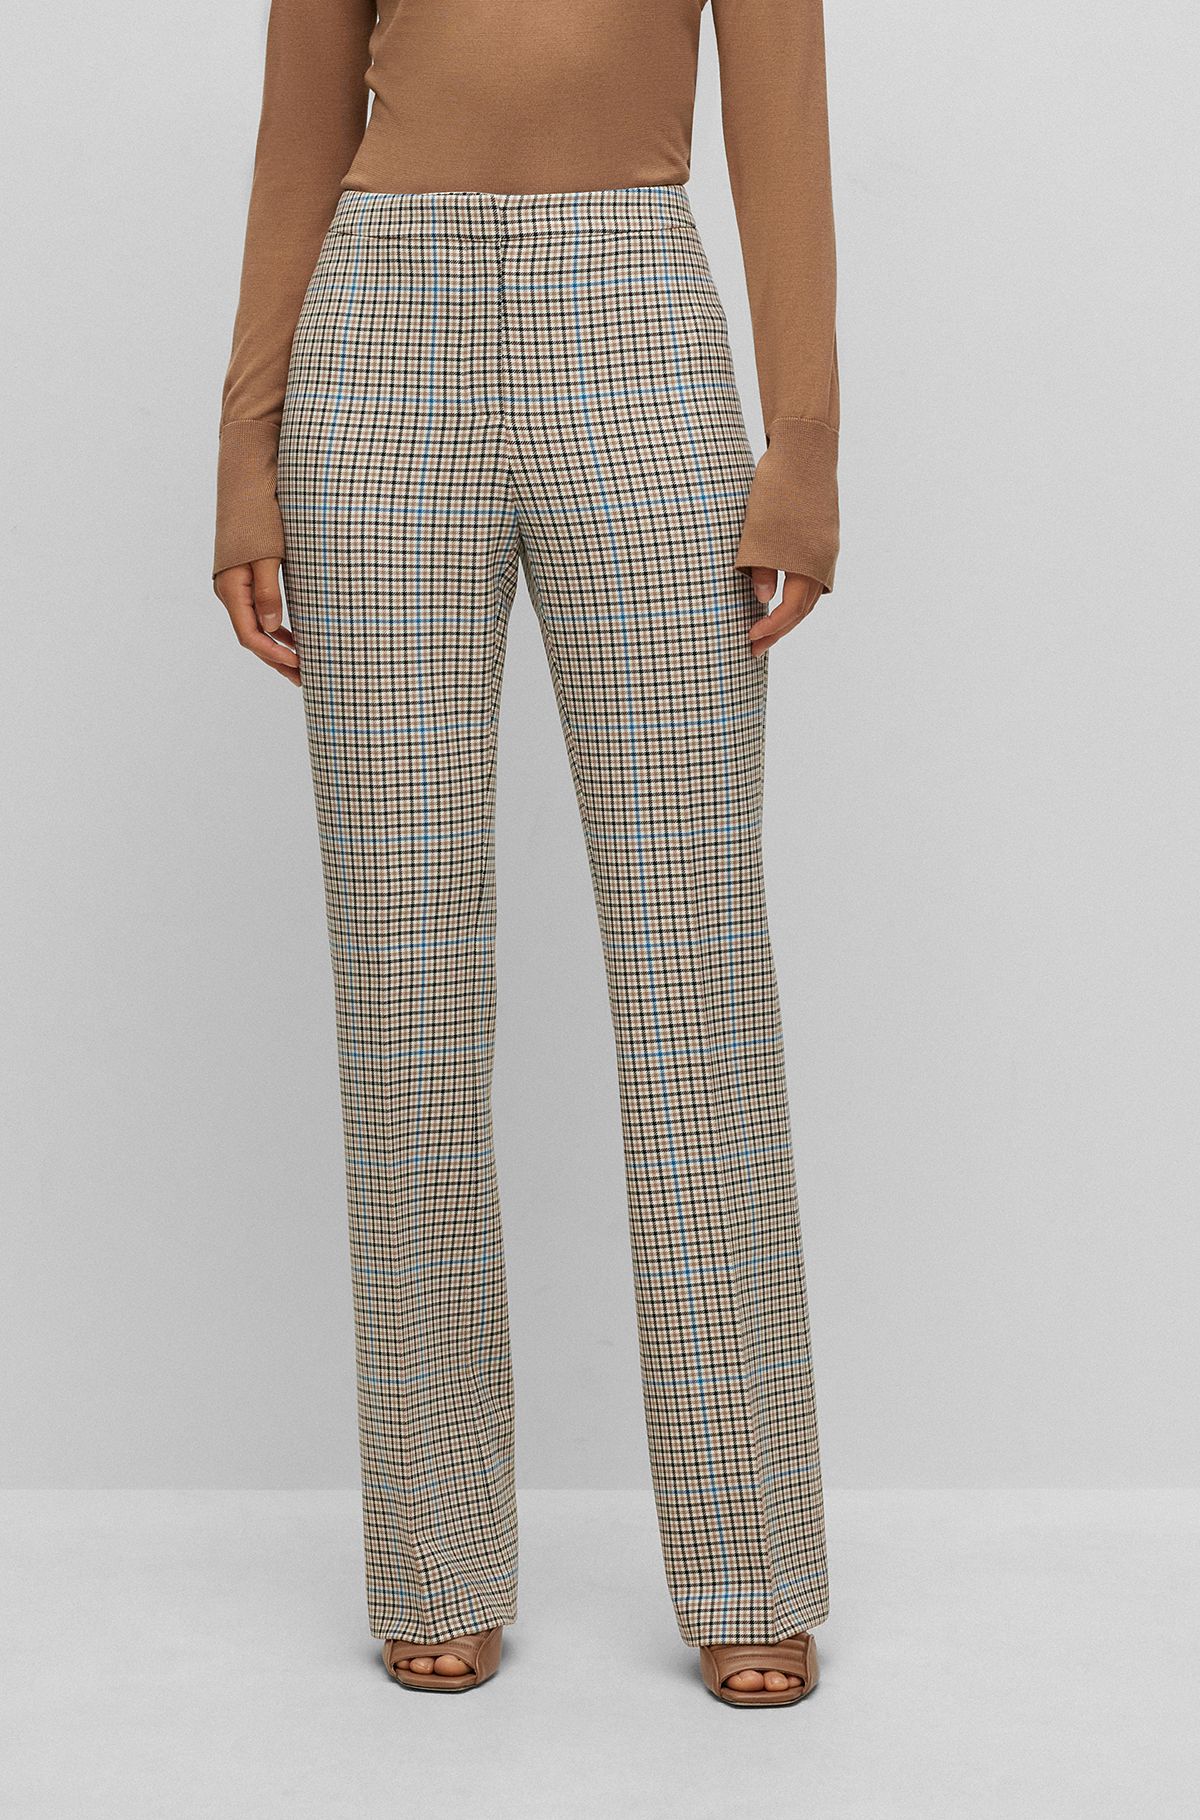 Regular-fit trousers in checked stretch material, Patterned